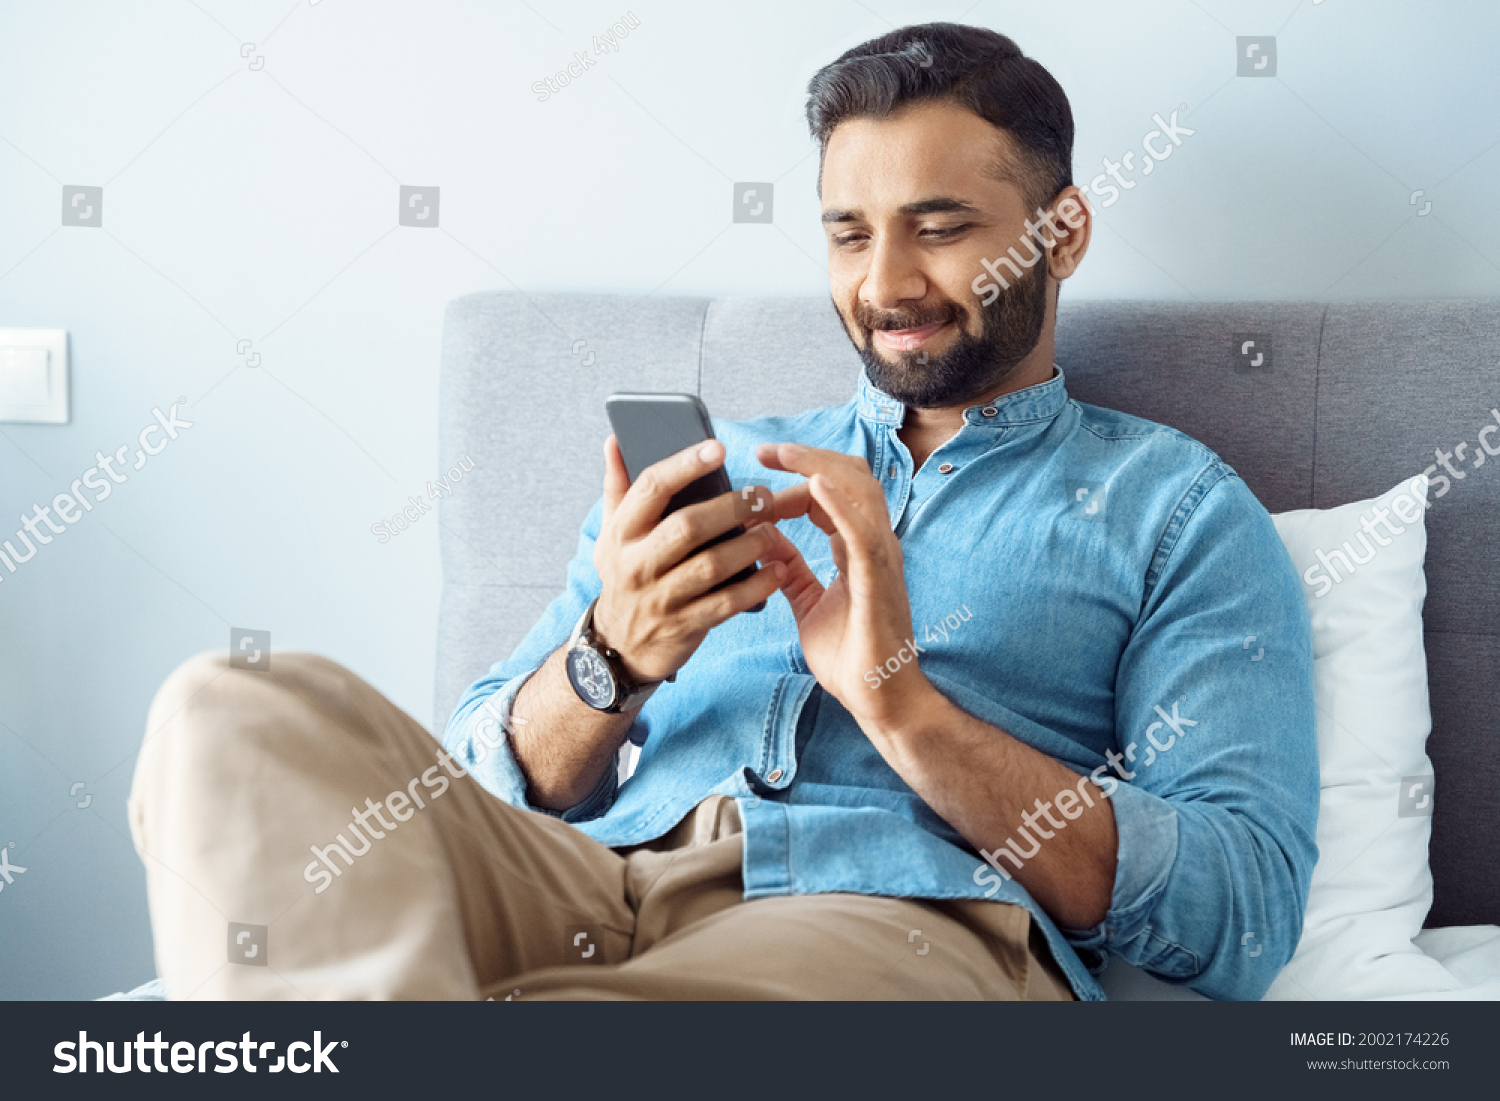 Smiling young adult indian freelance business man using mobile phone checking social media network feed or message chat sitting on bed at home. Online digital communication, rest after hard work day #2002174226